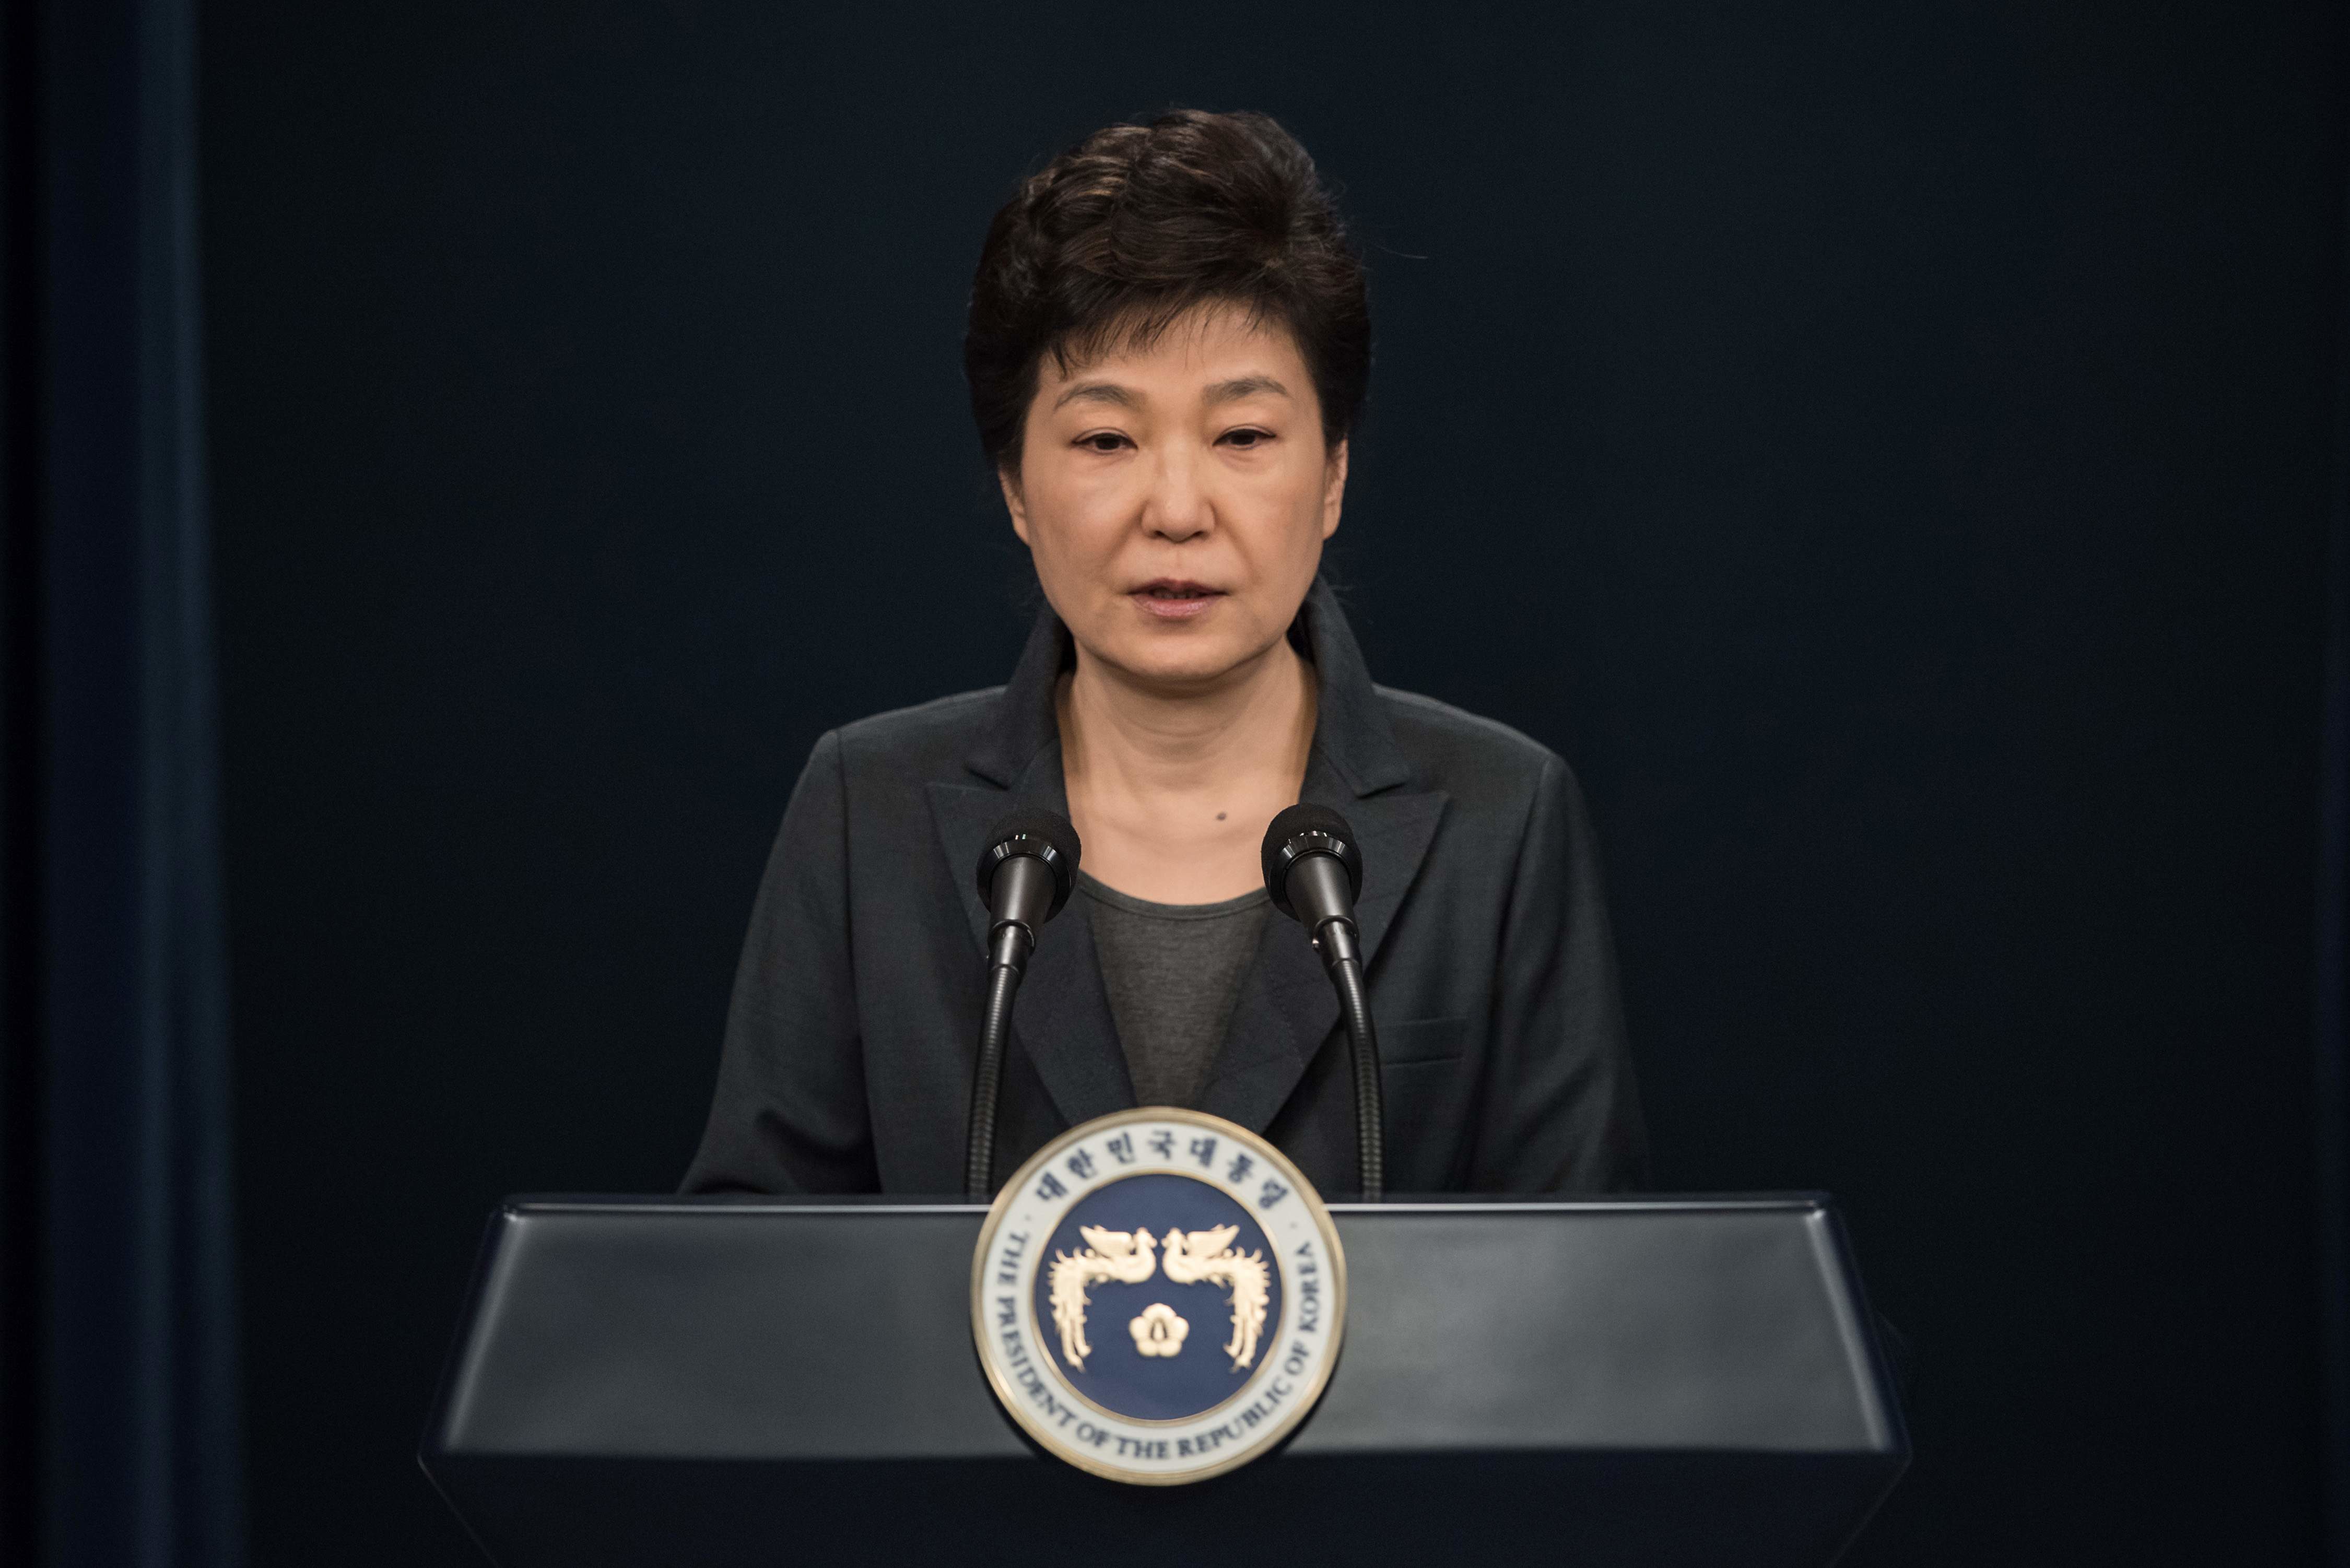 South Korea's President Park Geun-Hye speaks during an address to the nation at the presidential Blue House in Seoul on November 4, 2016. Park on November 4 agreed to submit to questioning by prosecutors investigating a corruption scandal engulfing her administration, accepting that the damaging fallout was "all my fault". / AFP PHOTO / Ed Jones